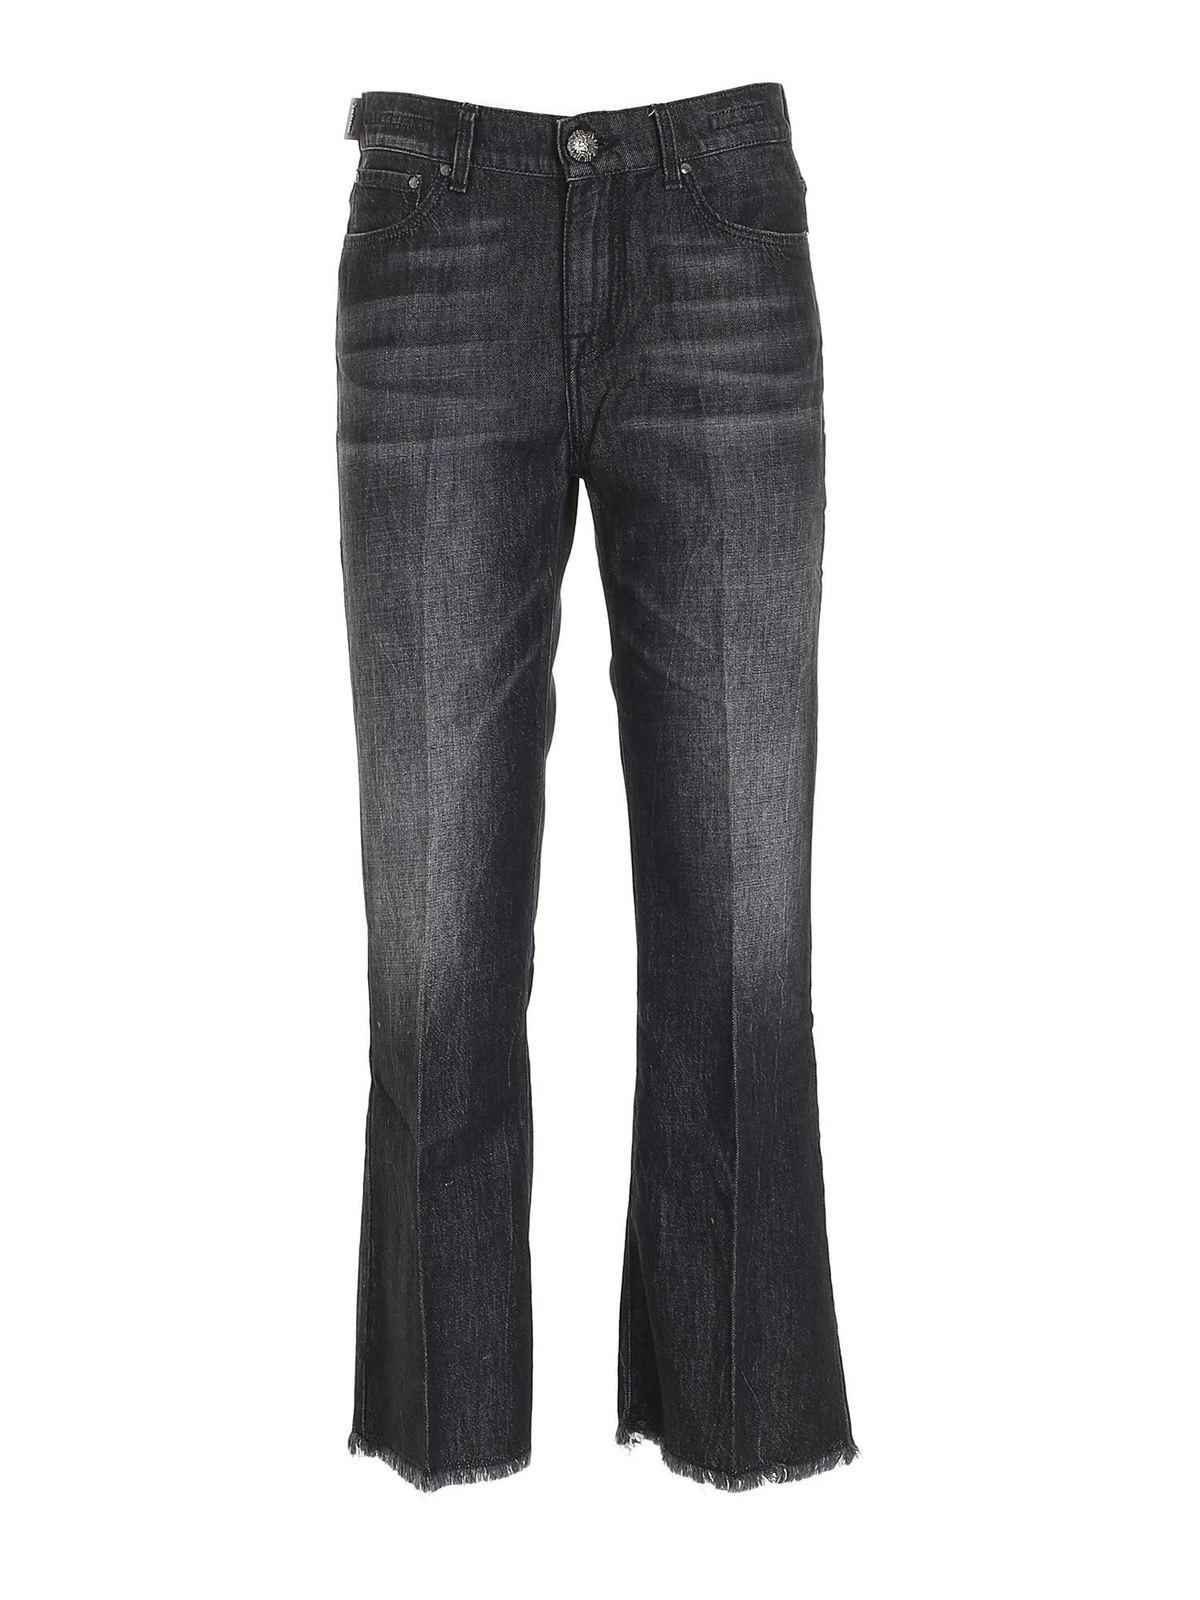 Jacob Cohen BOOTCUT JEANS IN FADED BLACK